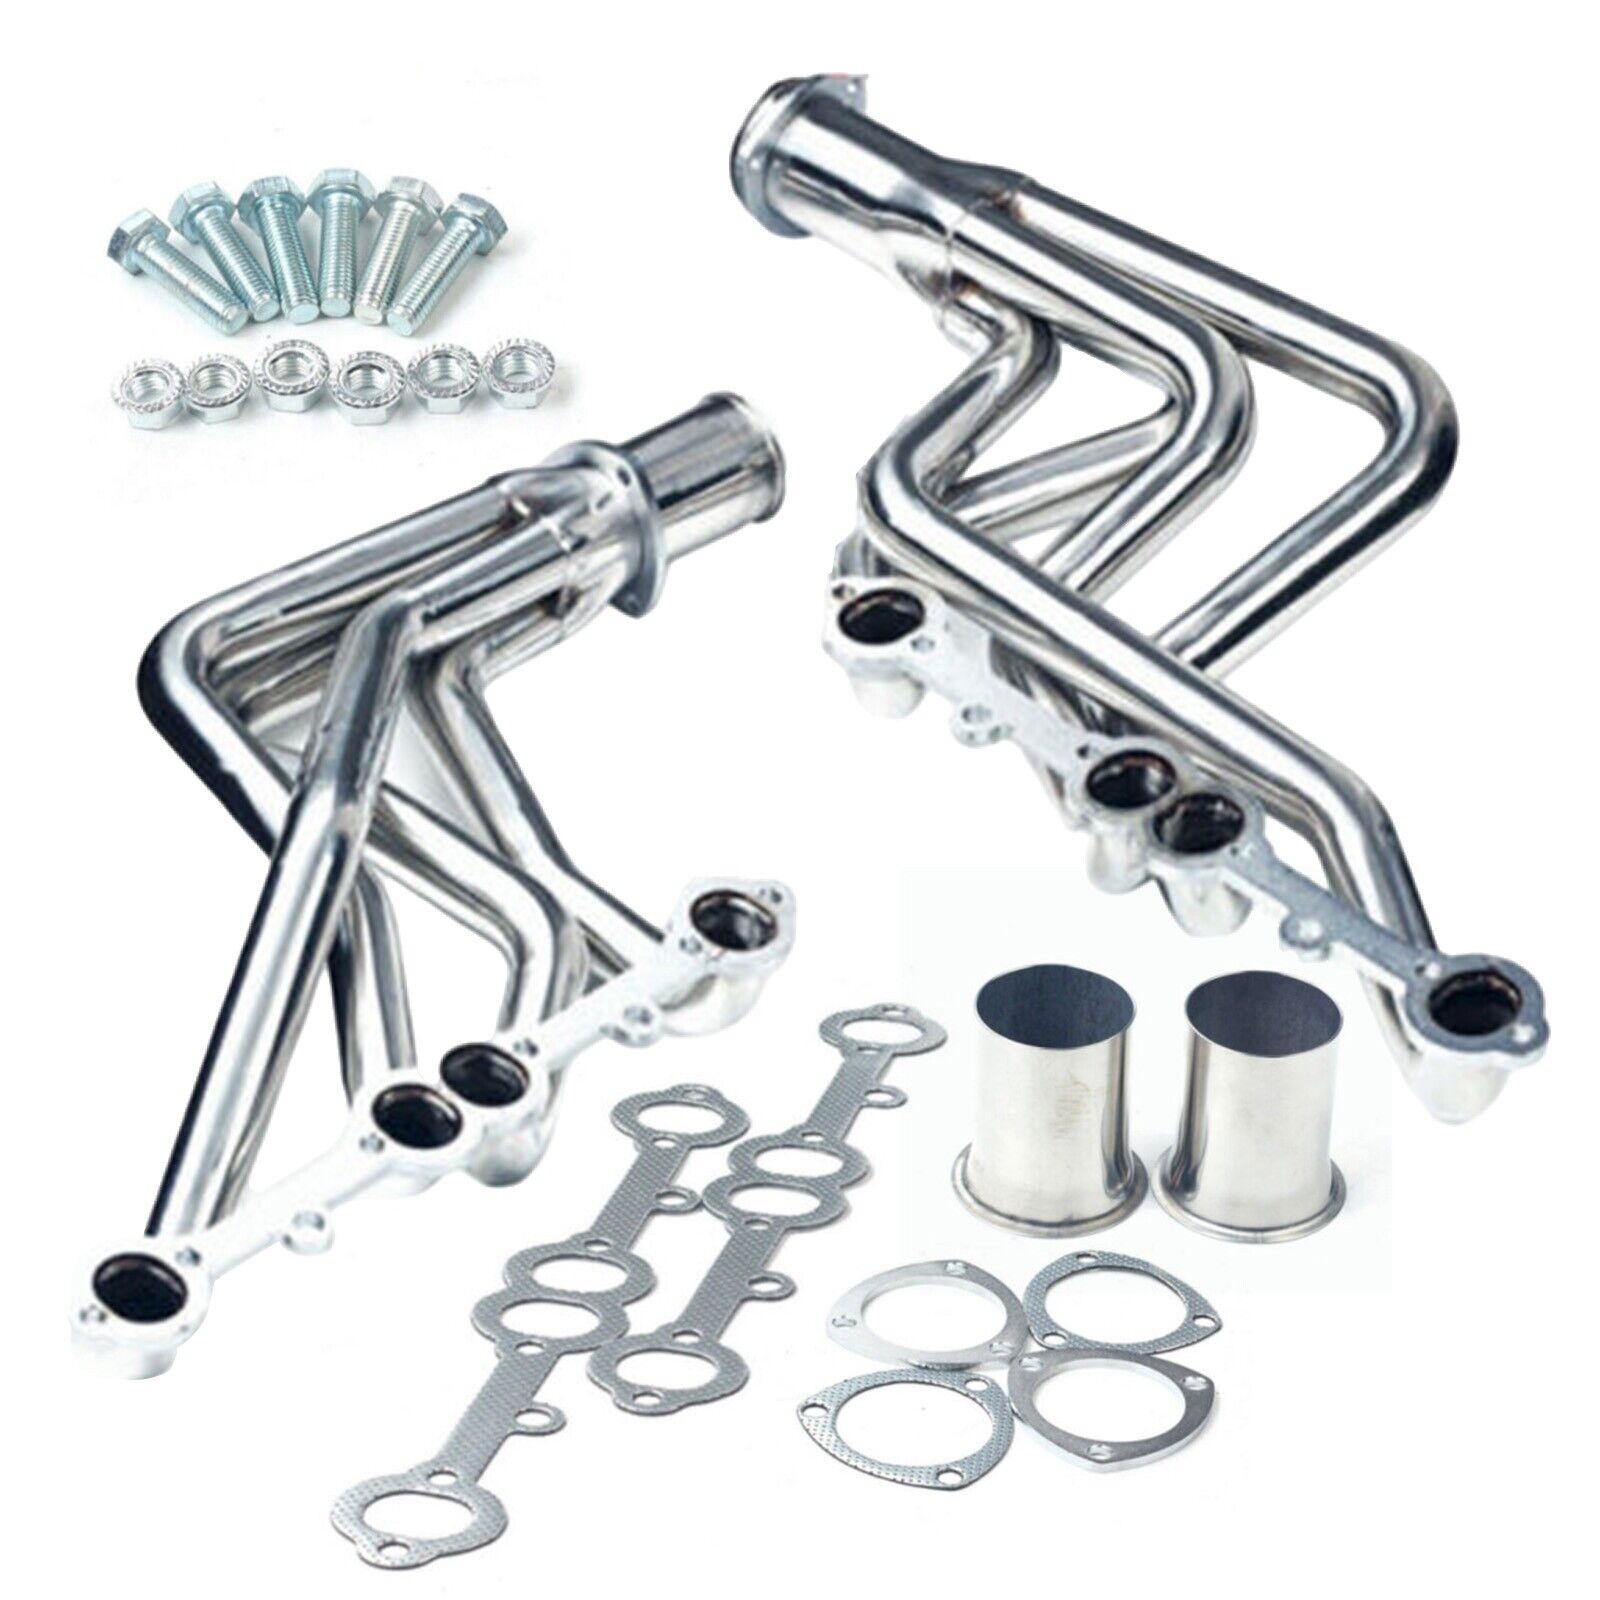 USA Stainless Headers For 73-85 Chevy Truck Blazer Suburban 2wd/4wd HeadersjIf6v